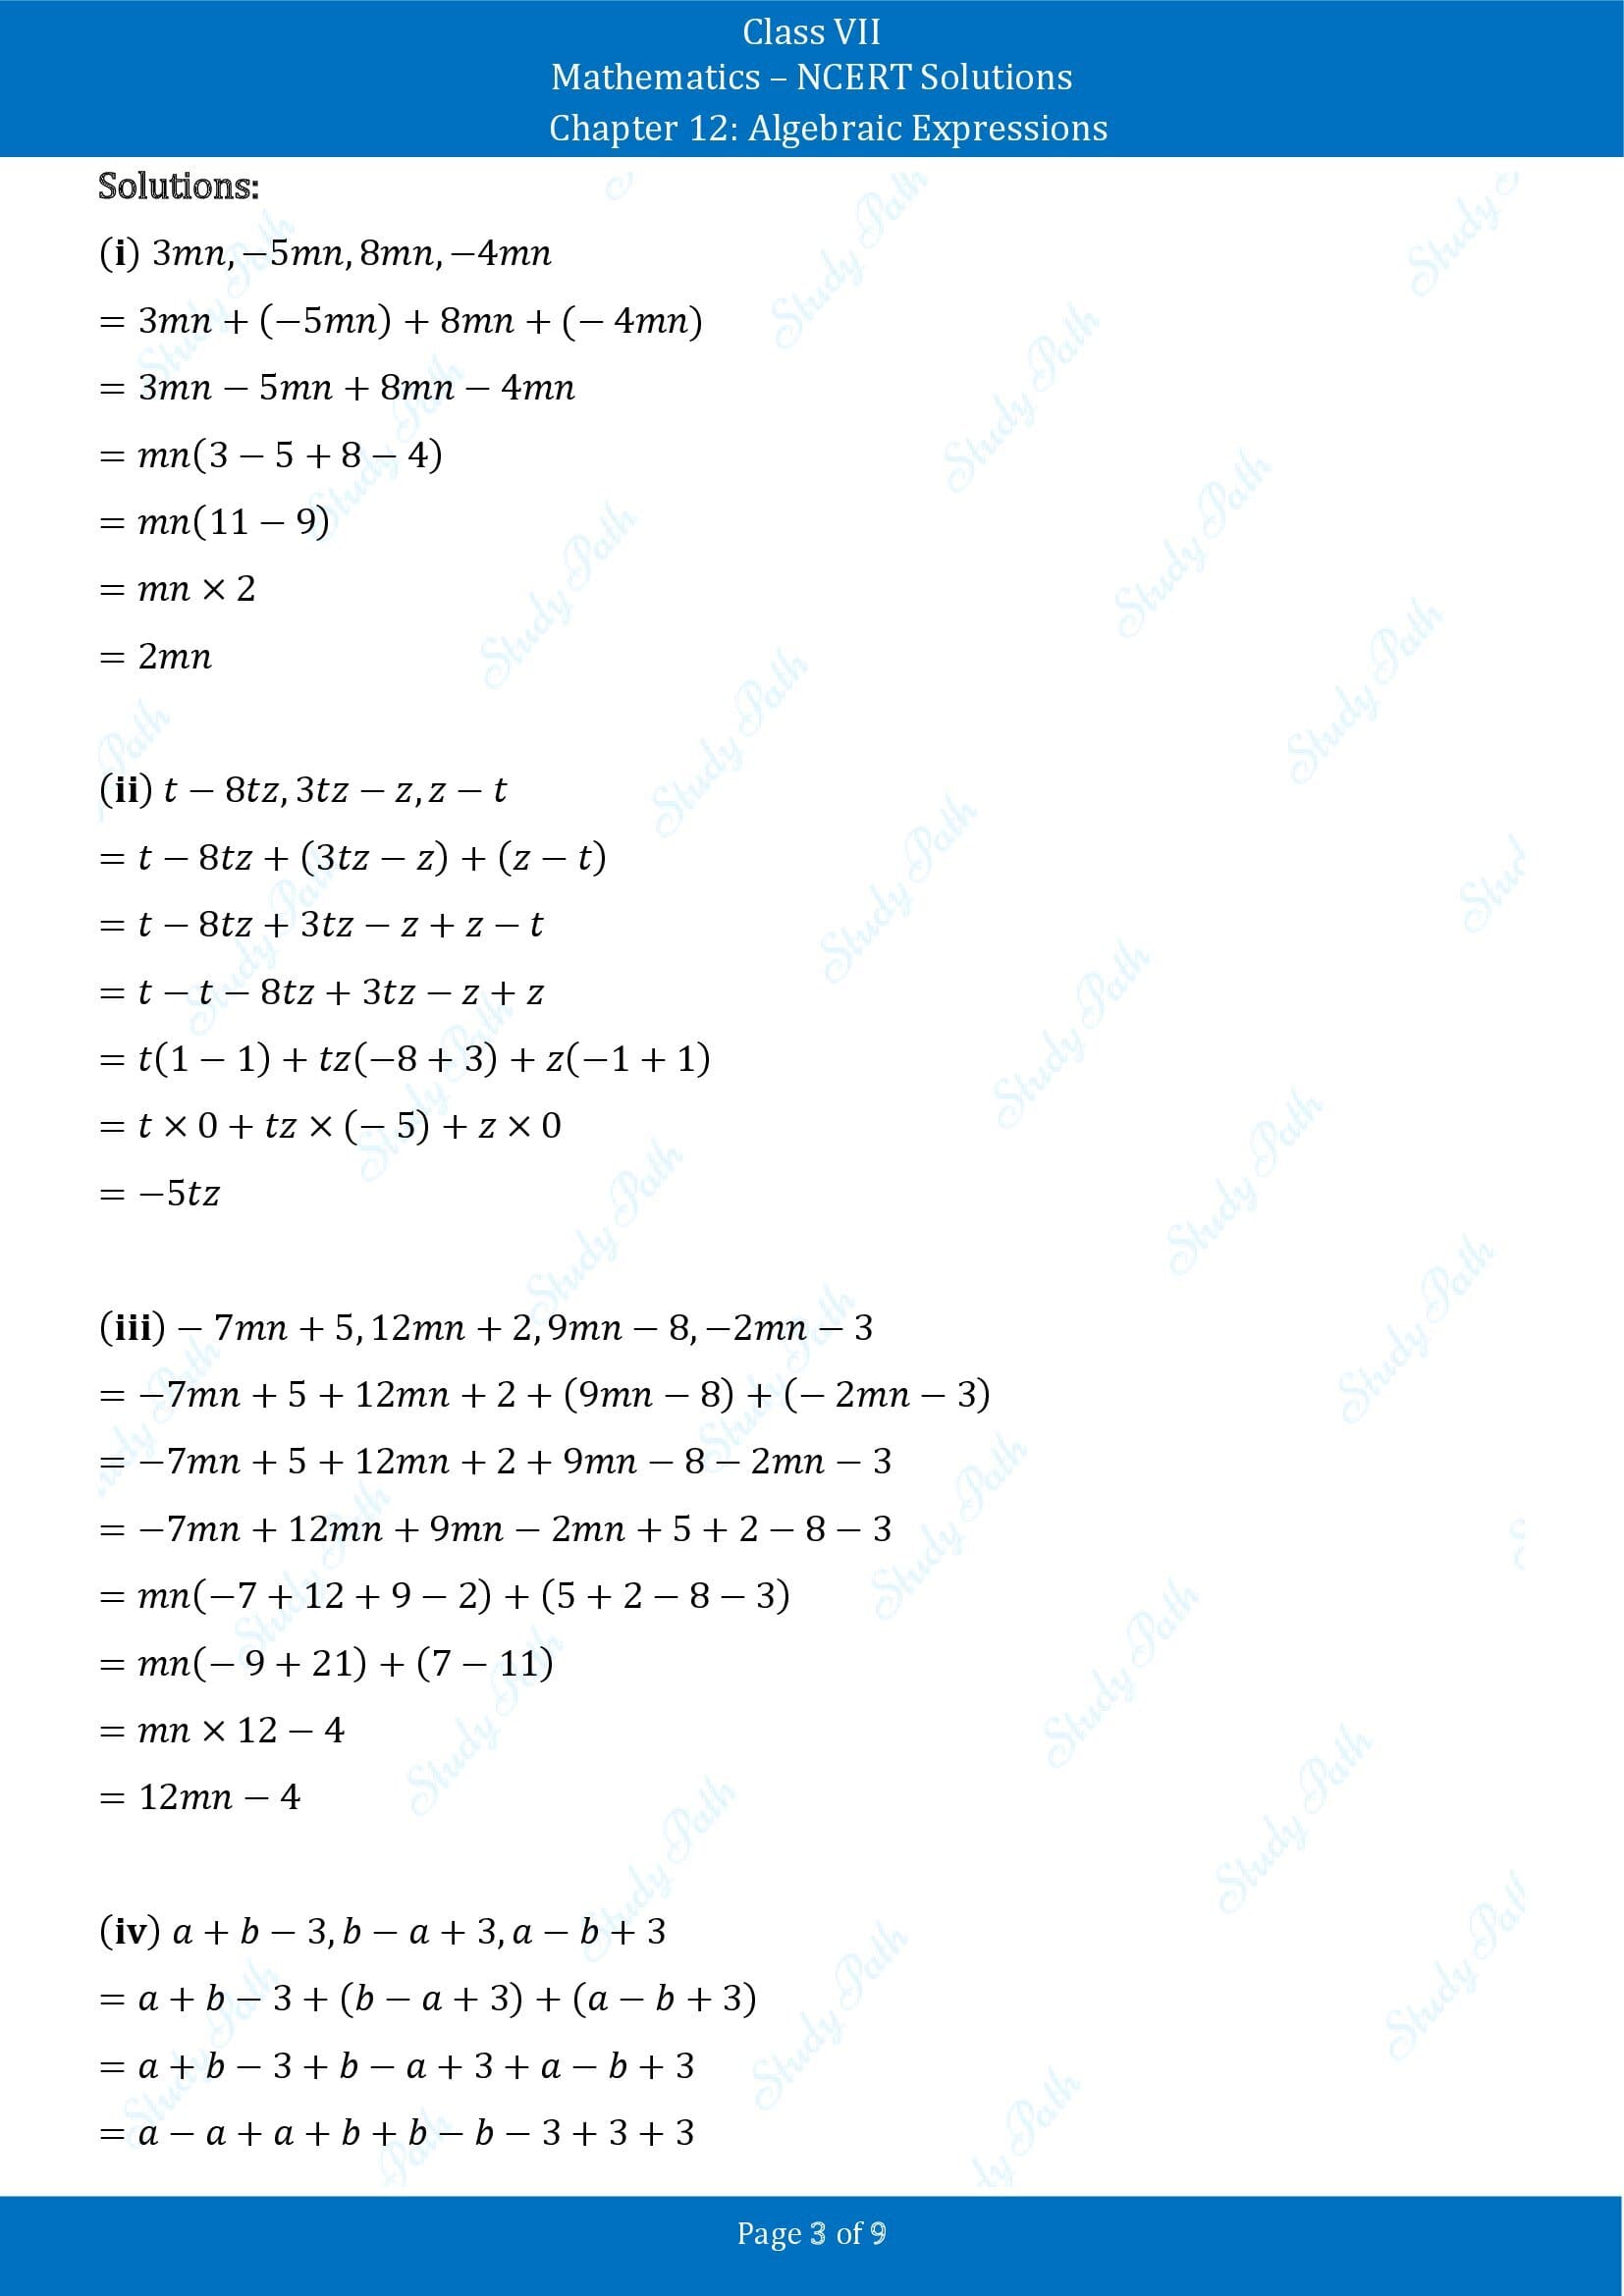 NCERT Solutions for Class 7 Maths Chapter 12 Algebraic Expressions Exercise 12.2 00003